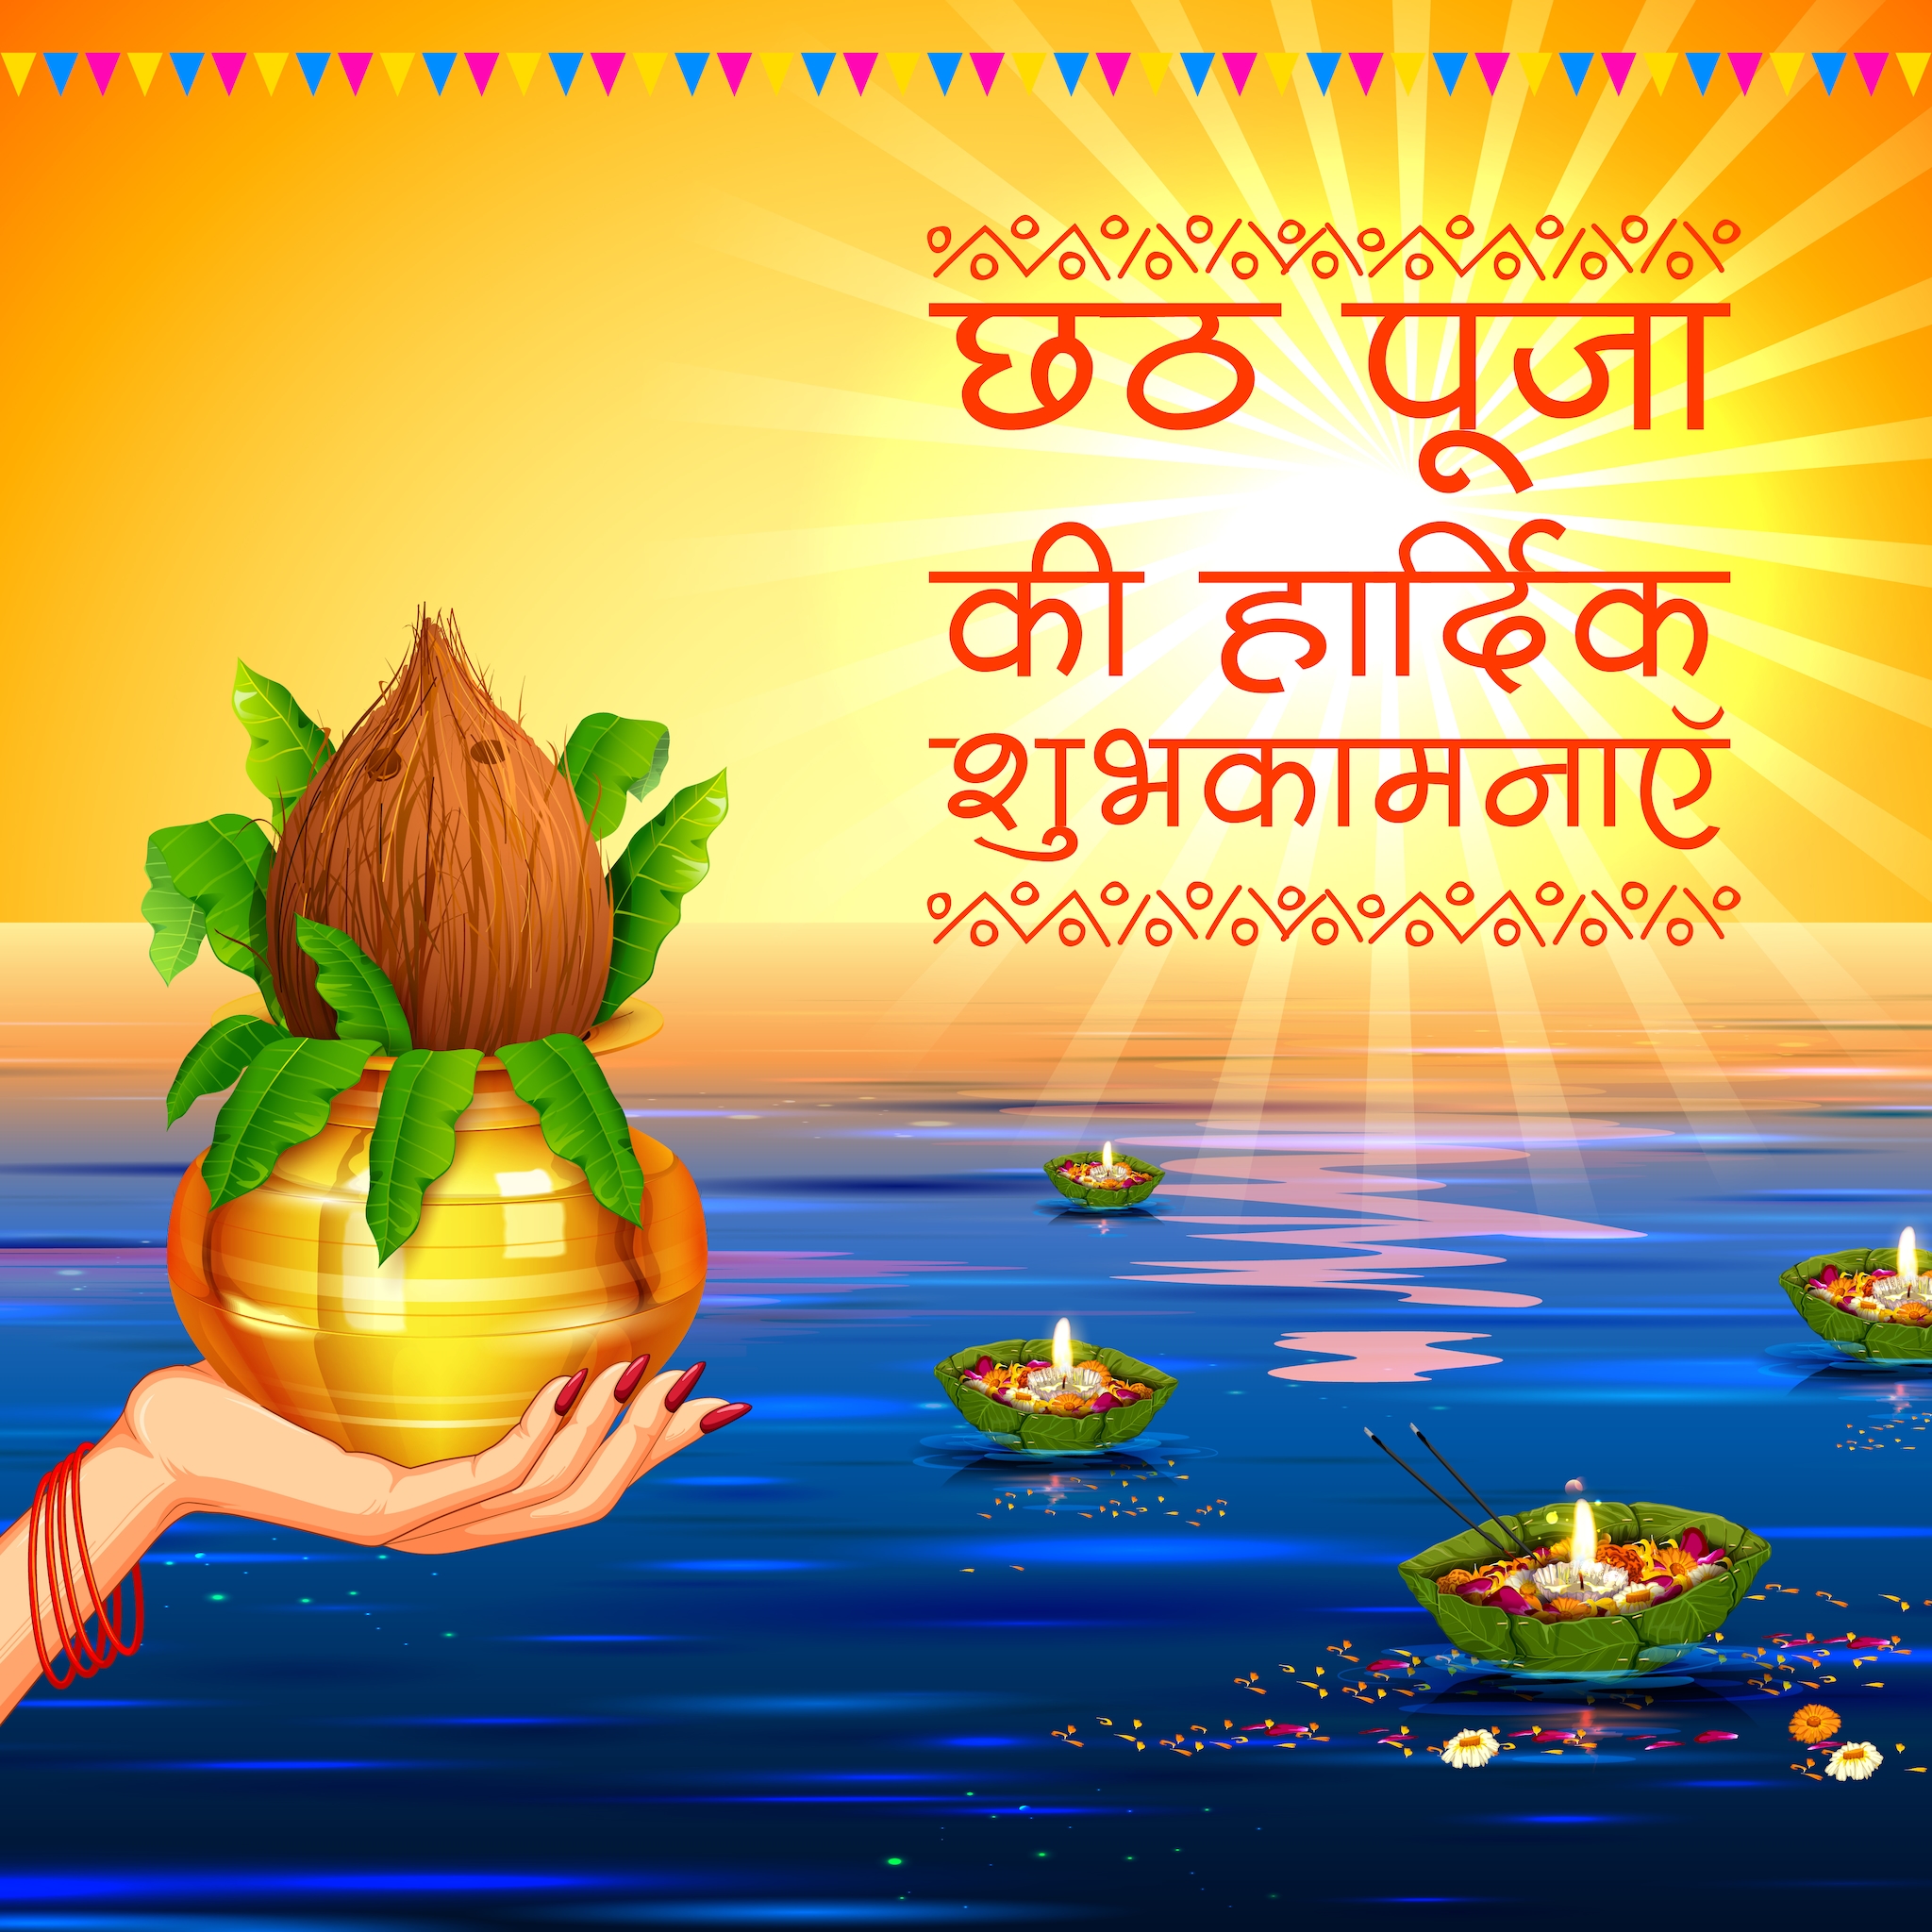 Happy Chhath Puja 2022: Wishes, Messages, Quotes, Greetings, SMS, WhatsApp and Facebook Status to share with your family and friends.  (Image: Shutterstock) 